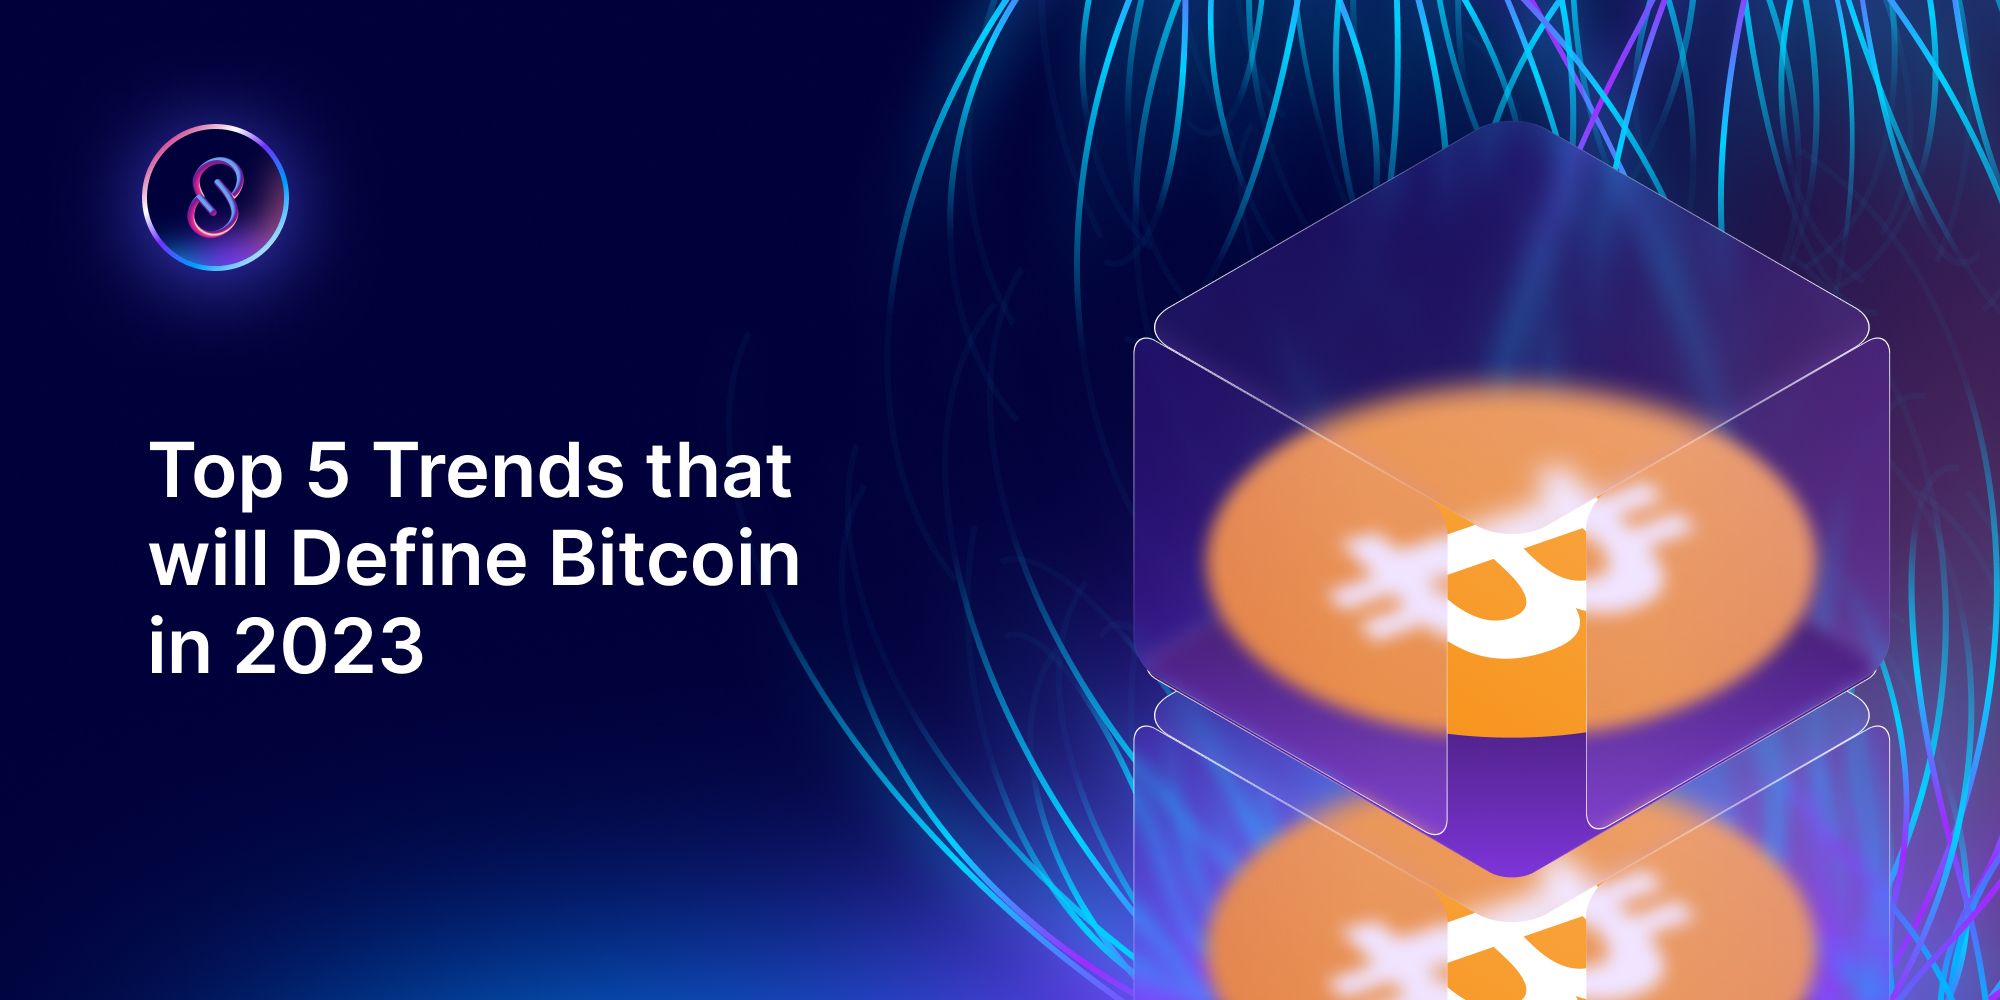 Top 5 Trends that will Define Bitcoin in 2023